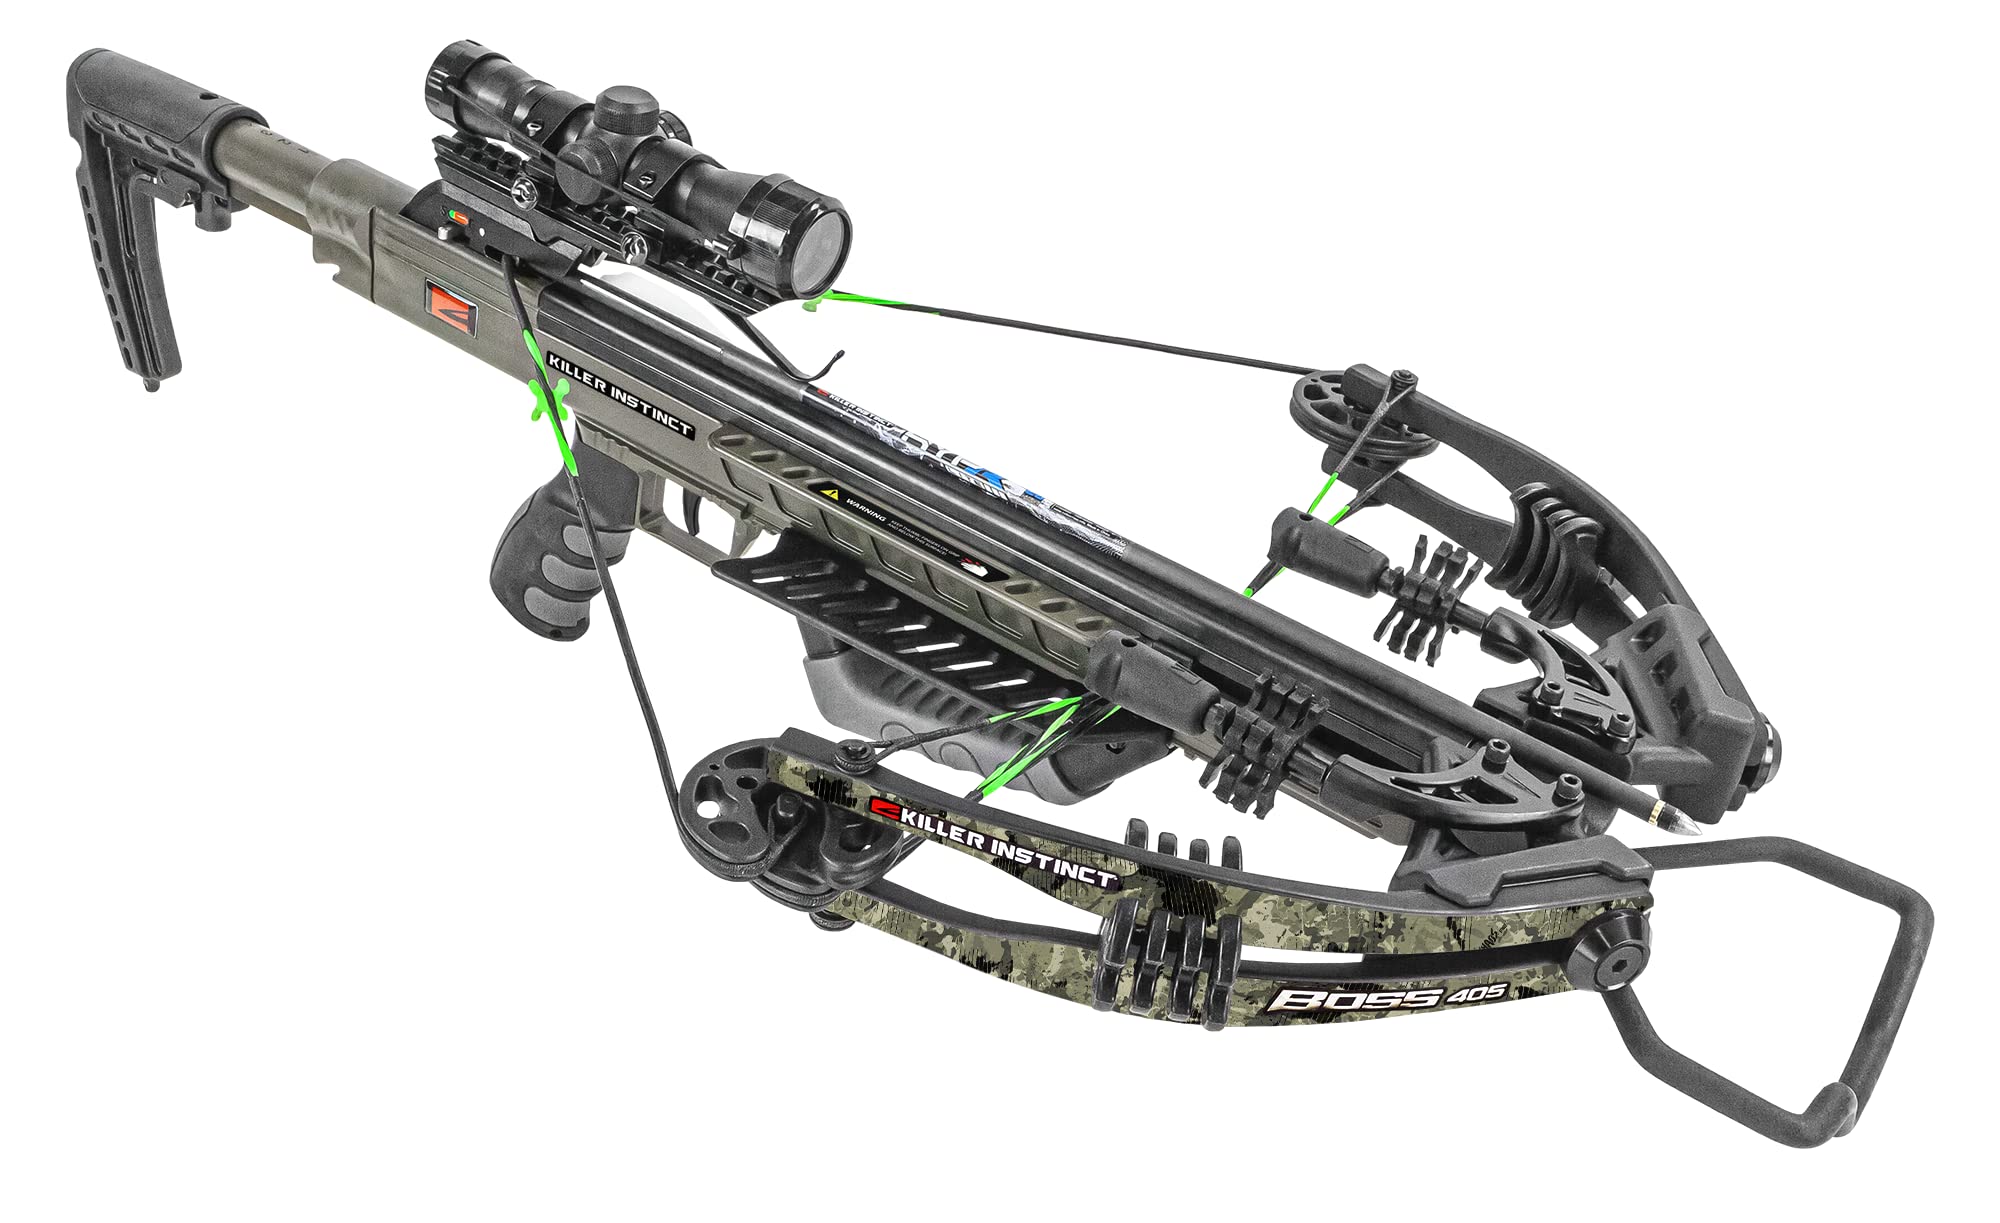 KILLER INSTINCT Boss 405 Crossbow Pro Package with 4x32 IR-W Scope, Rope Cocker, String Suppressors, 3-Bolt Quiver, 3 Hypr Lite Bolts and Field Tips, Stick of Rail Lube